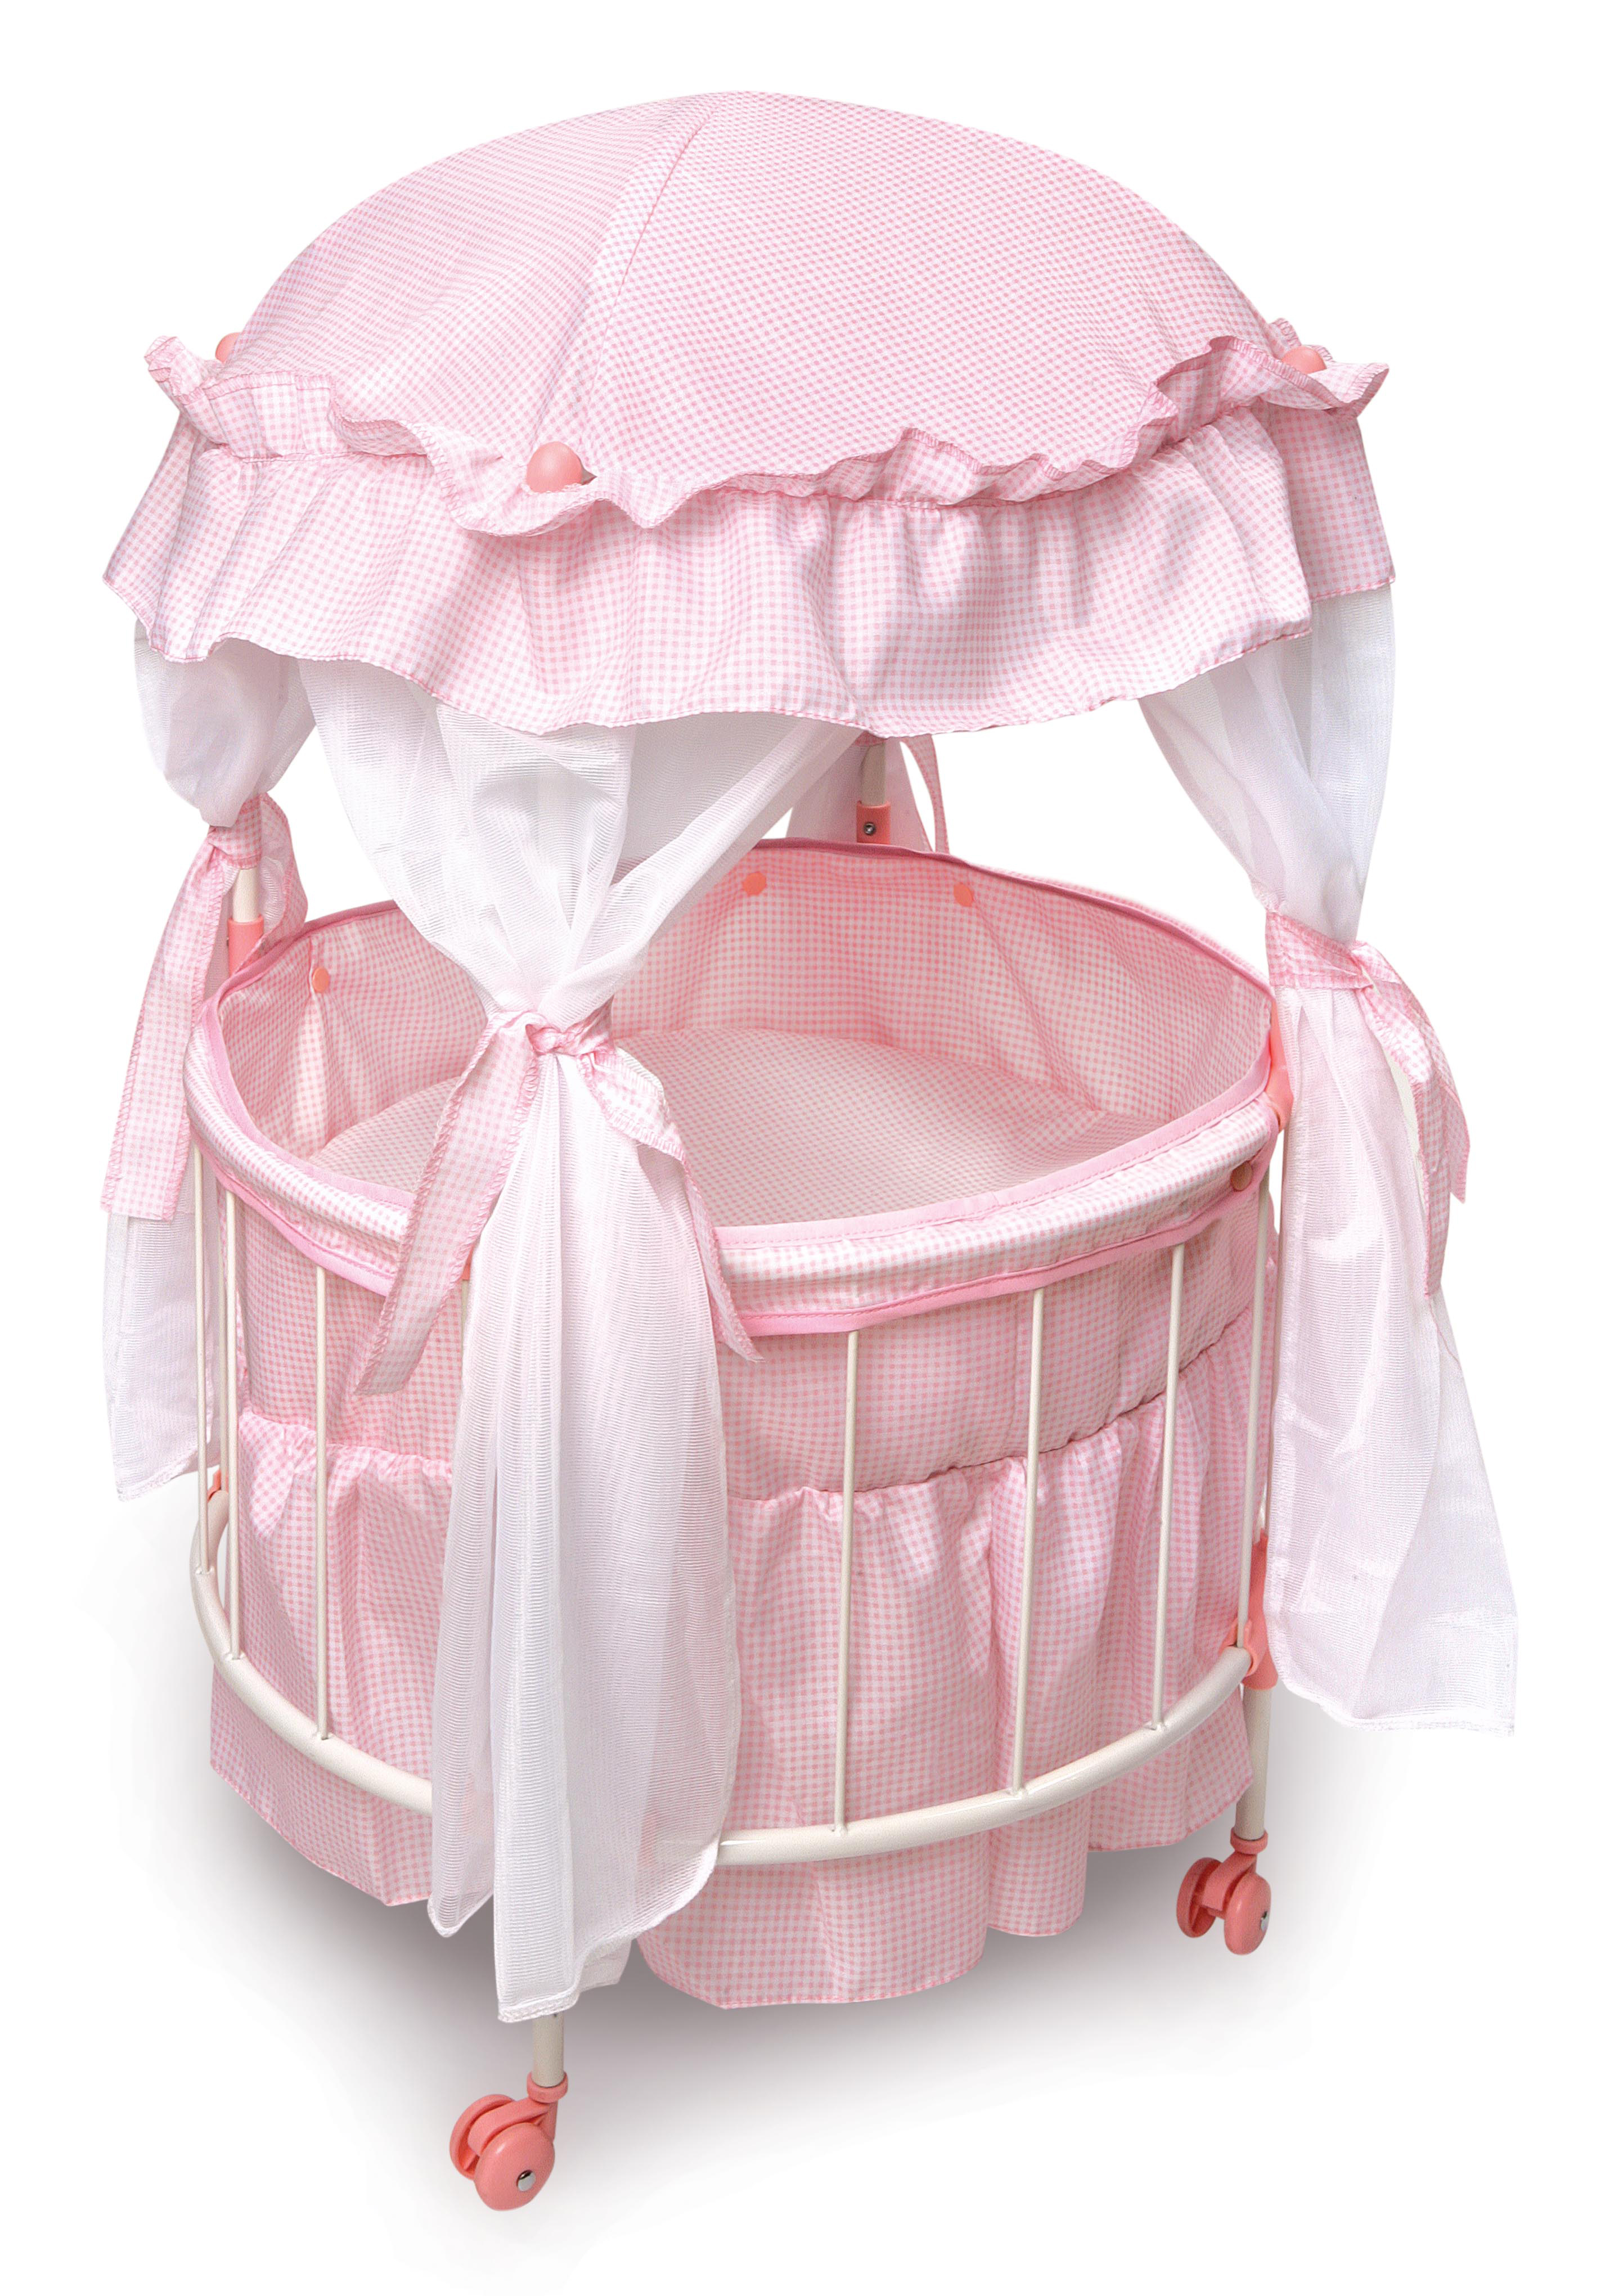 Royal Pavilion Round Doll Crib with Canopy and Bedding - Pink/White